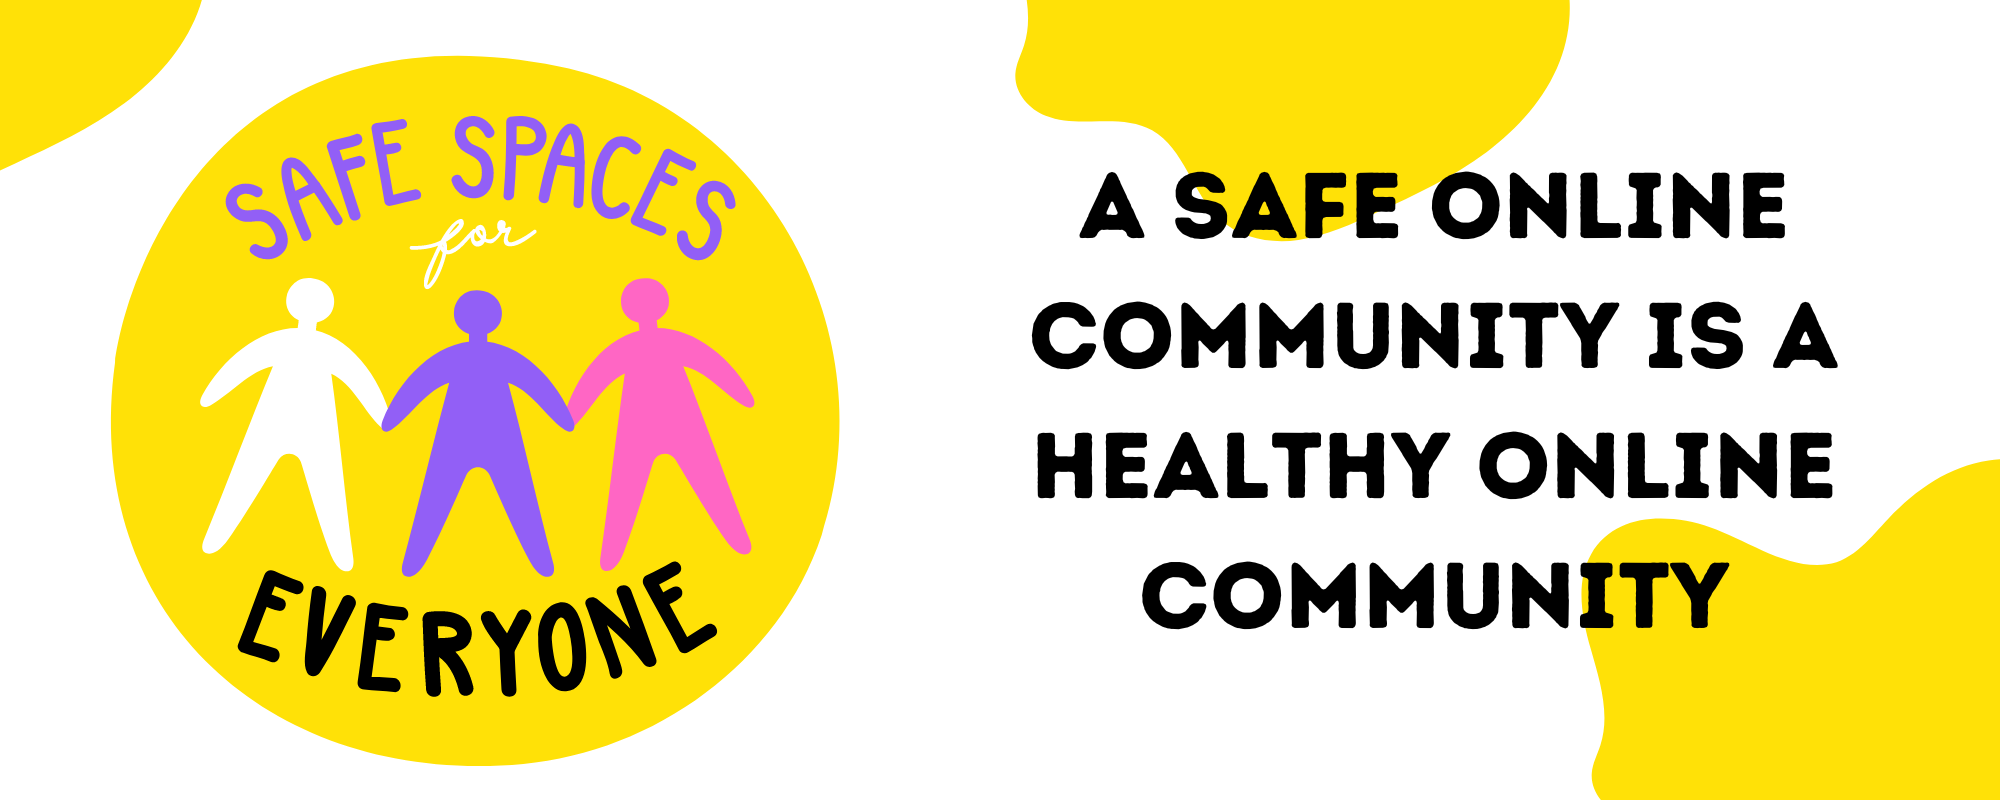 Safe spaces for everyone logo